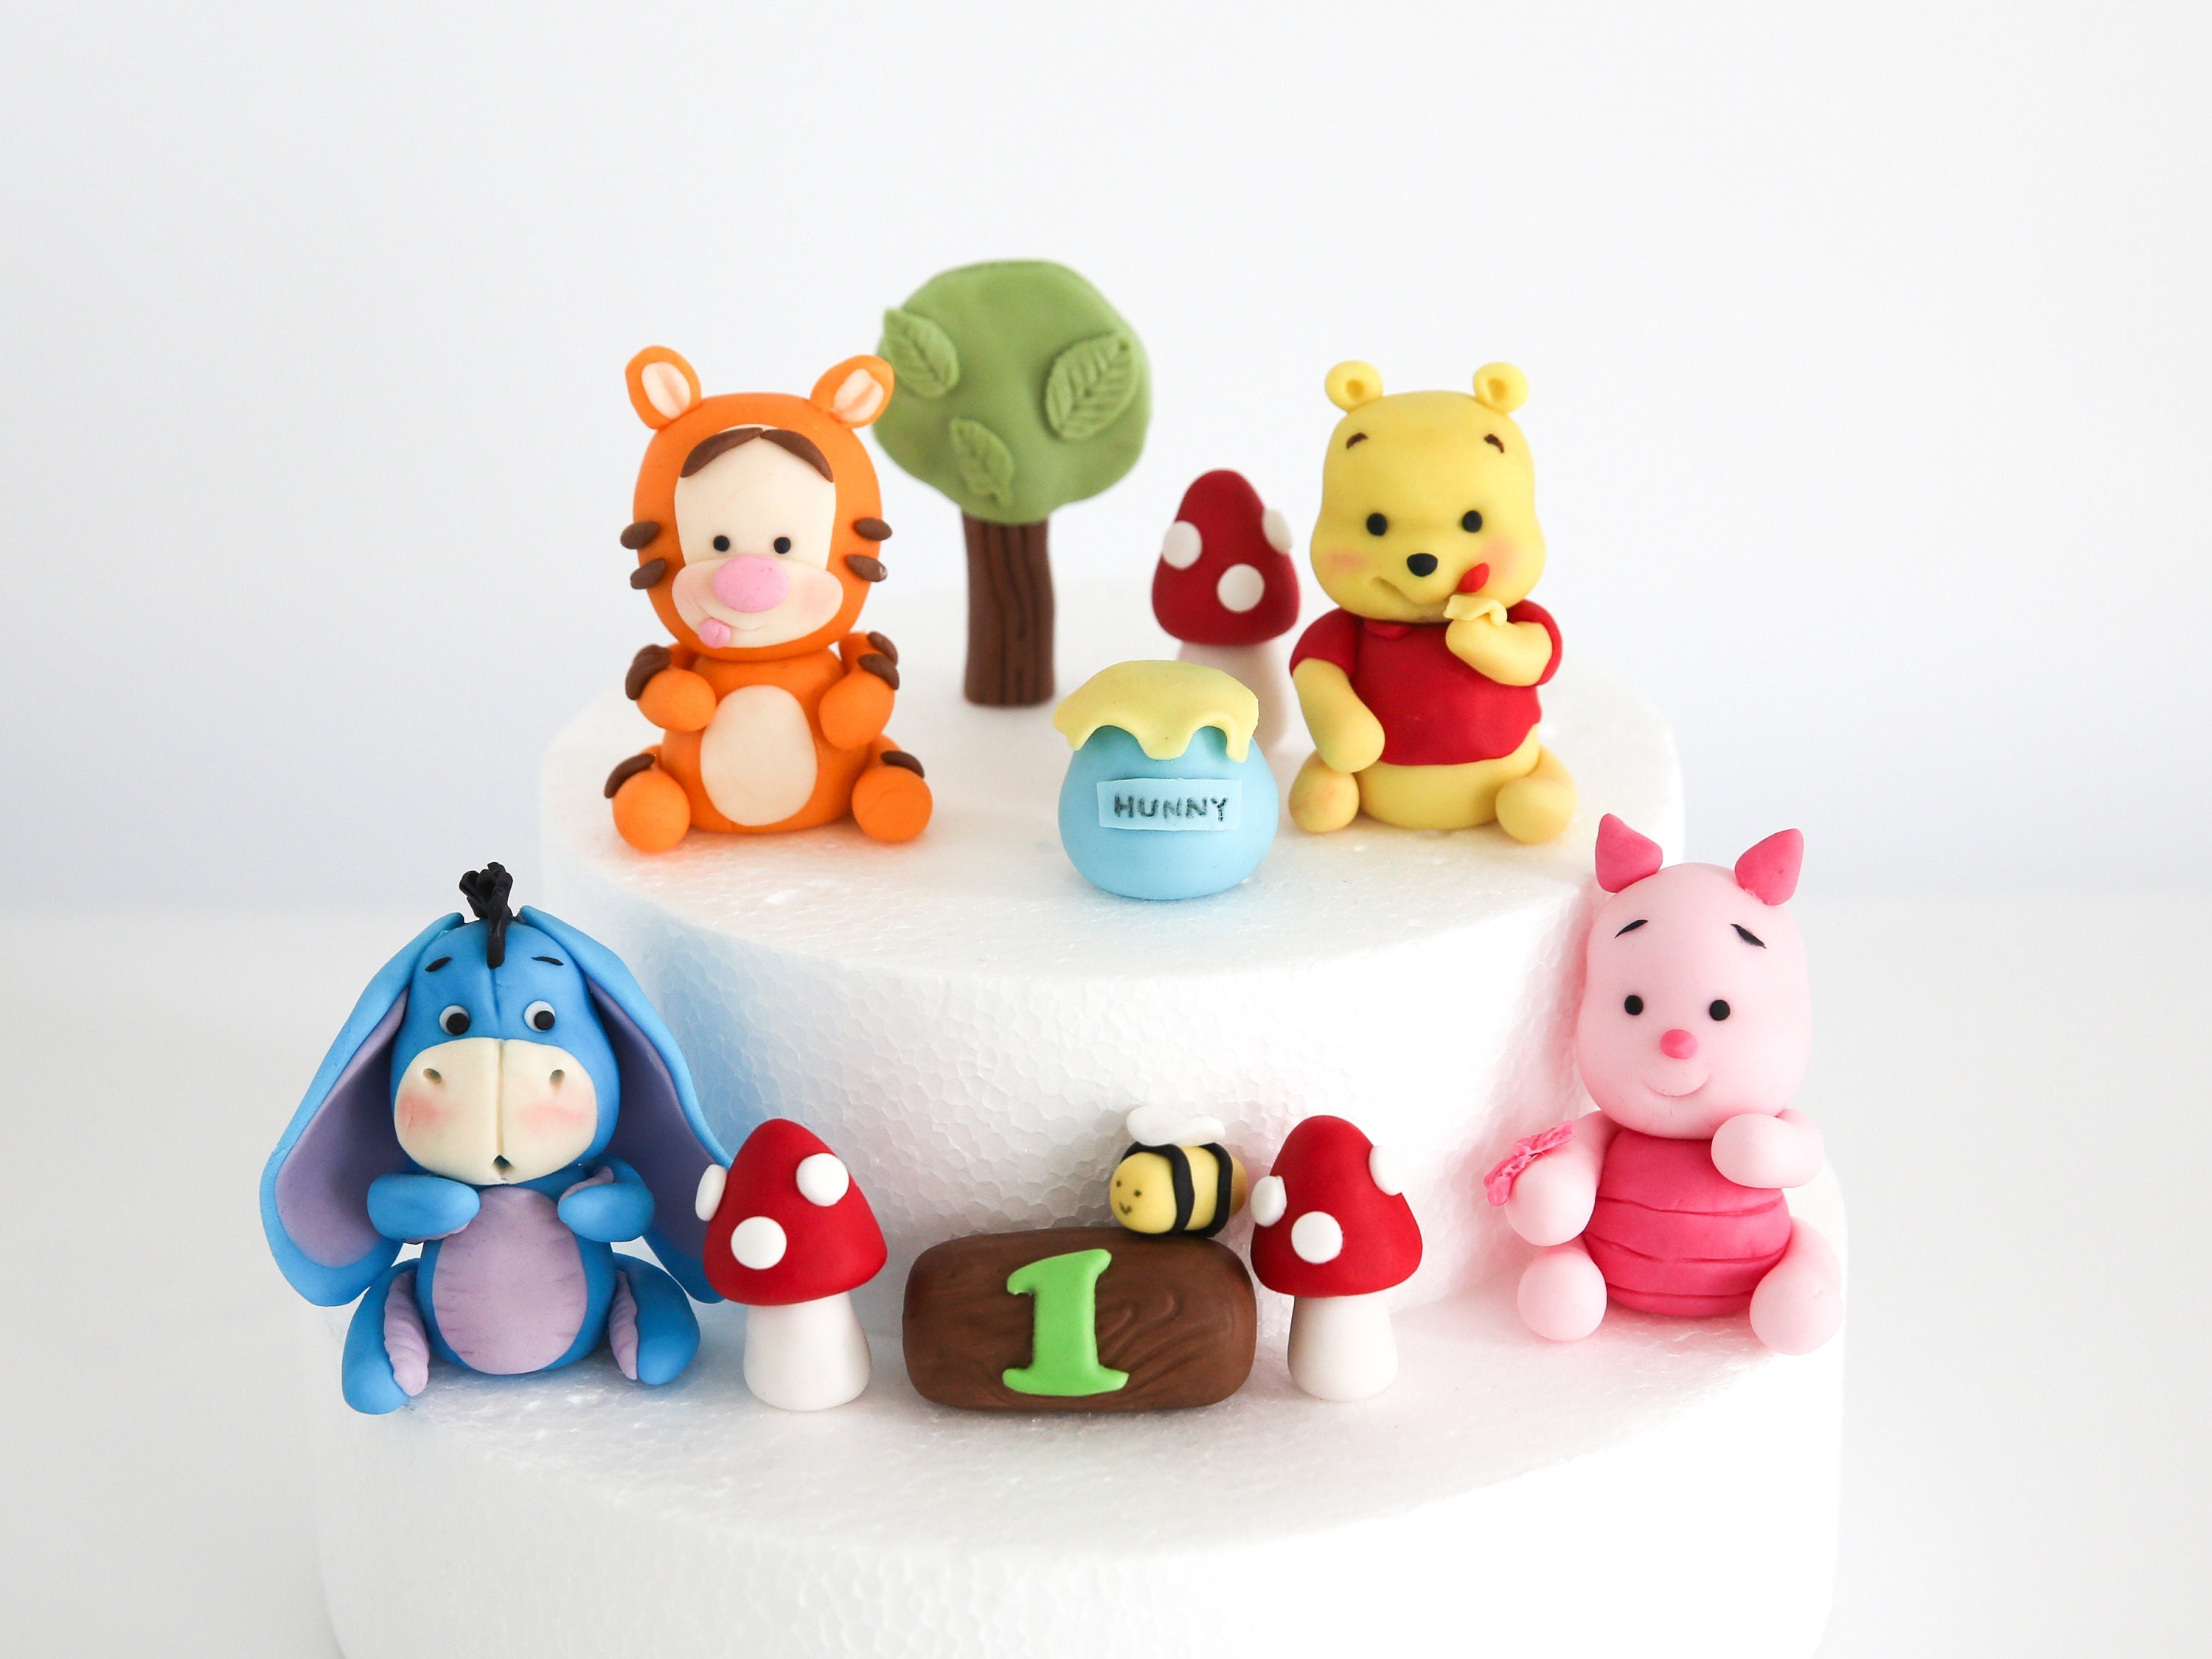 WINNIE THE POOH BABIES Party Edible Cake topper image